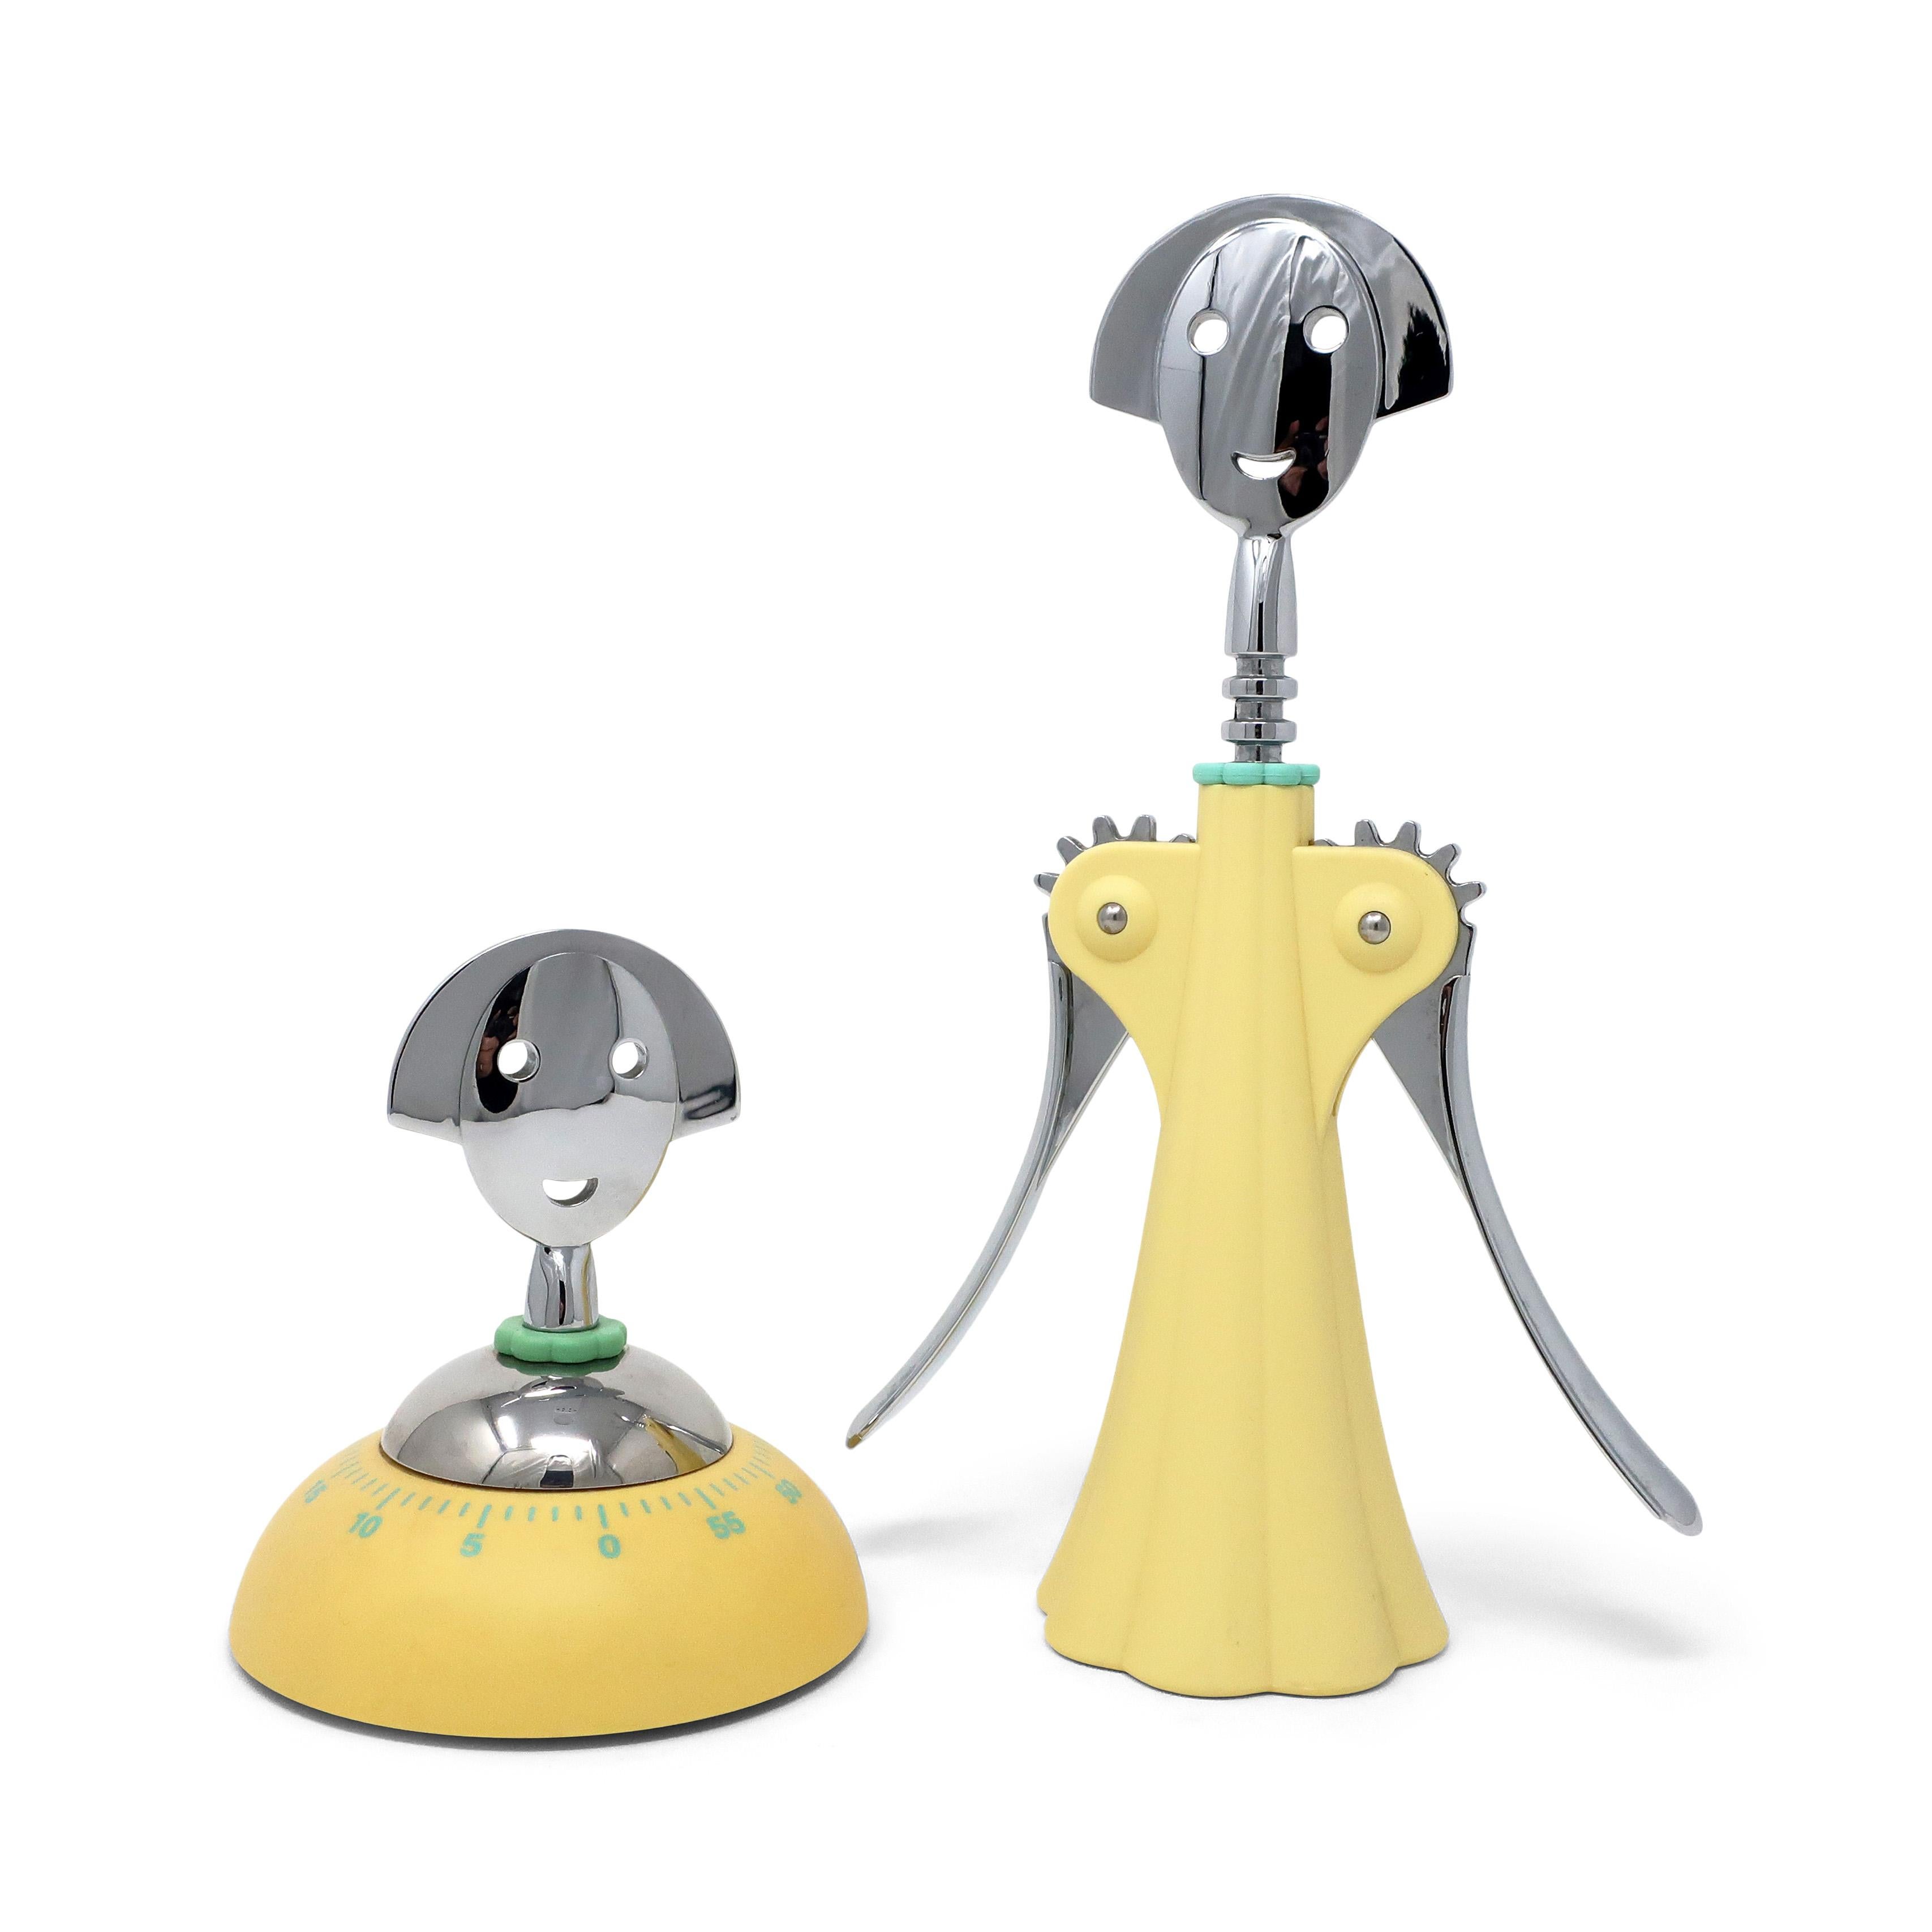 A chrome and yellow corkscrew and kitchen timer from Alessandro Mendini’s iconic Anna G line for Alessi. These two pieces, from a Classic collection of 1990s housewares design, are sleek and whimsical, and overflowing with personality. Chrome